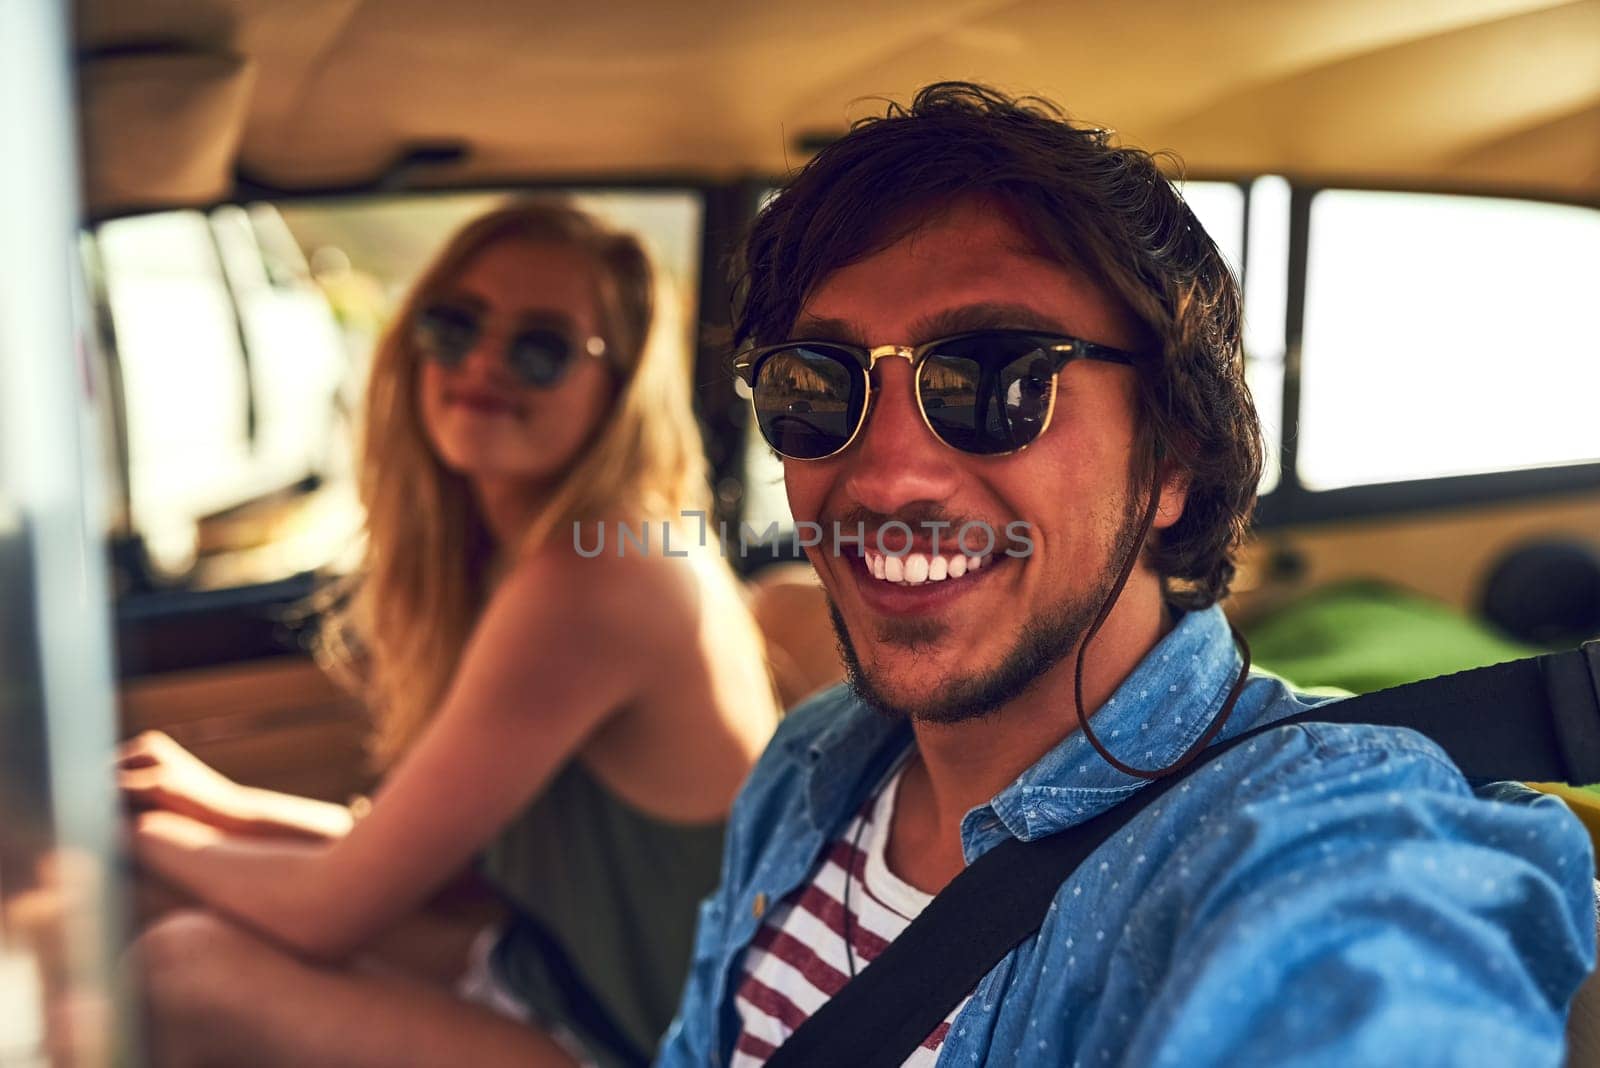 Theres no one else Id rather travel with. Cropped portrait of an affectionate young couple taking a roadtrip together